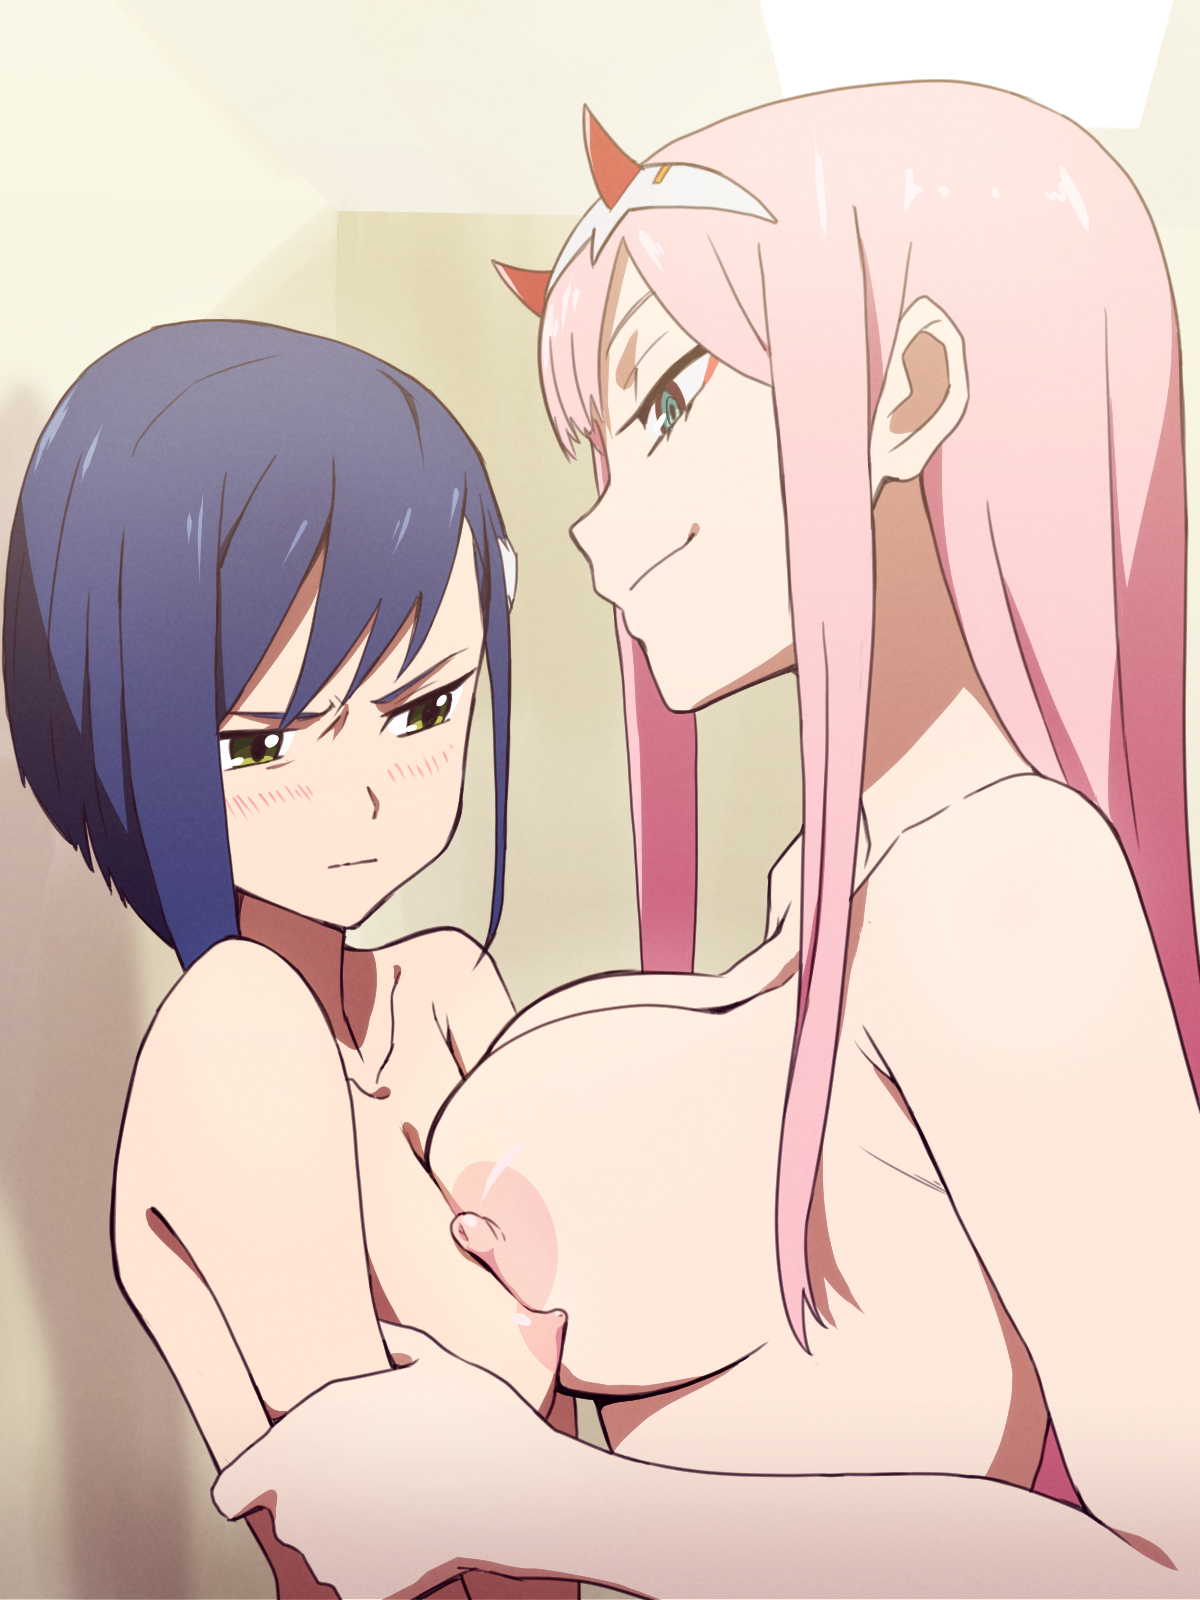 Neptune reccomend Darling! Zero Two Roleplay JOI Darling in the Franxx Anime Girl Hentai.